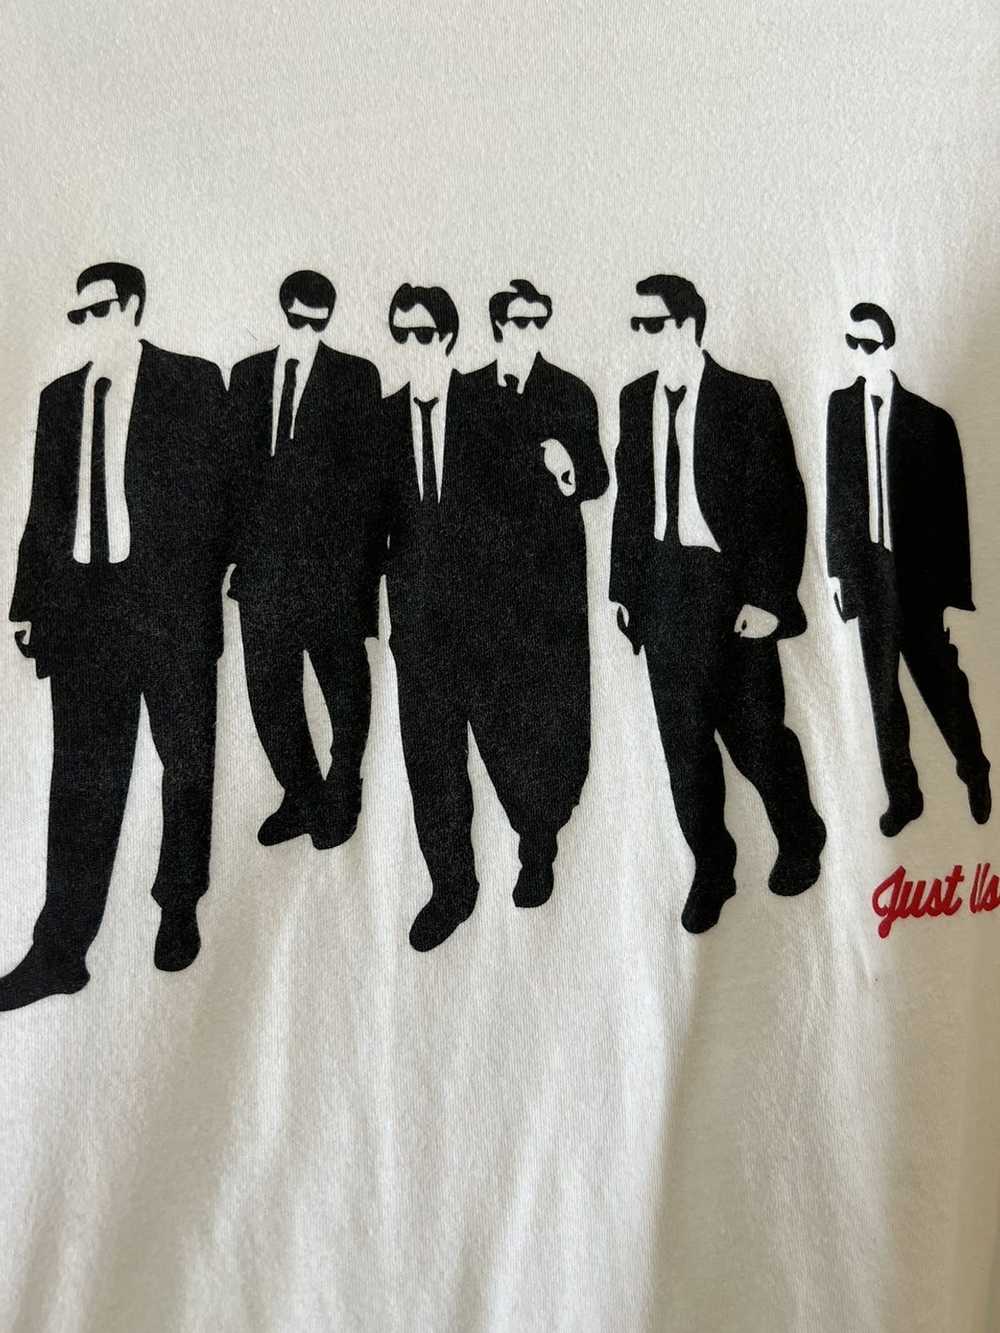 Kith Kith just us reservoir dogs t shirt size m - image 2